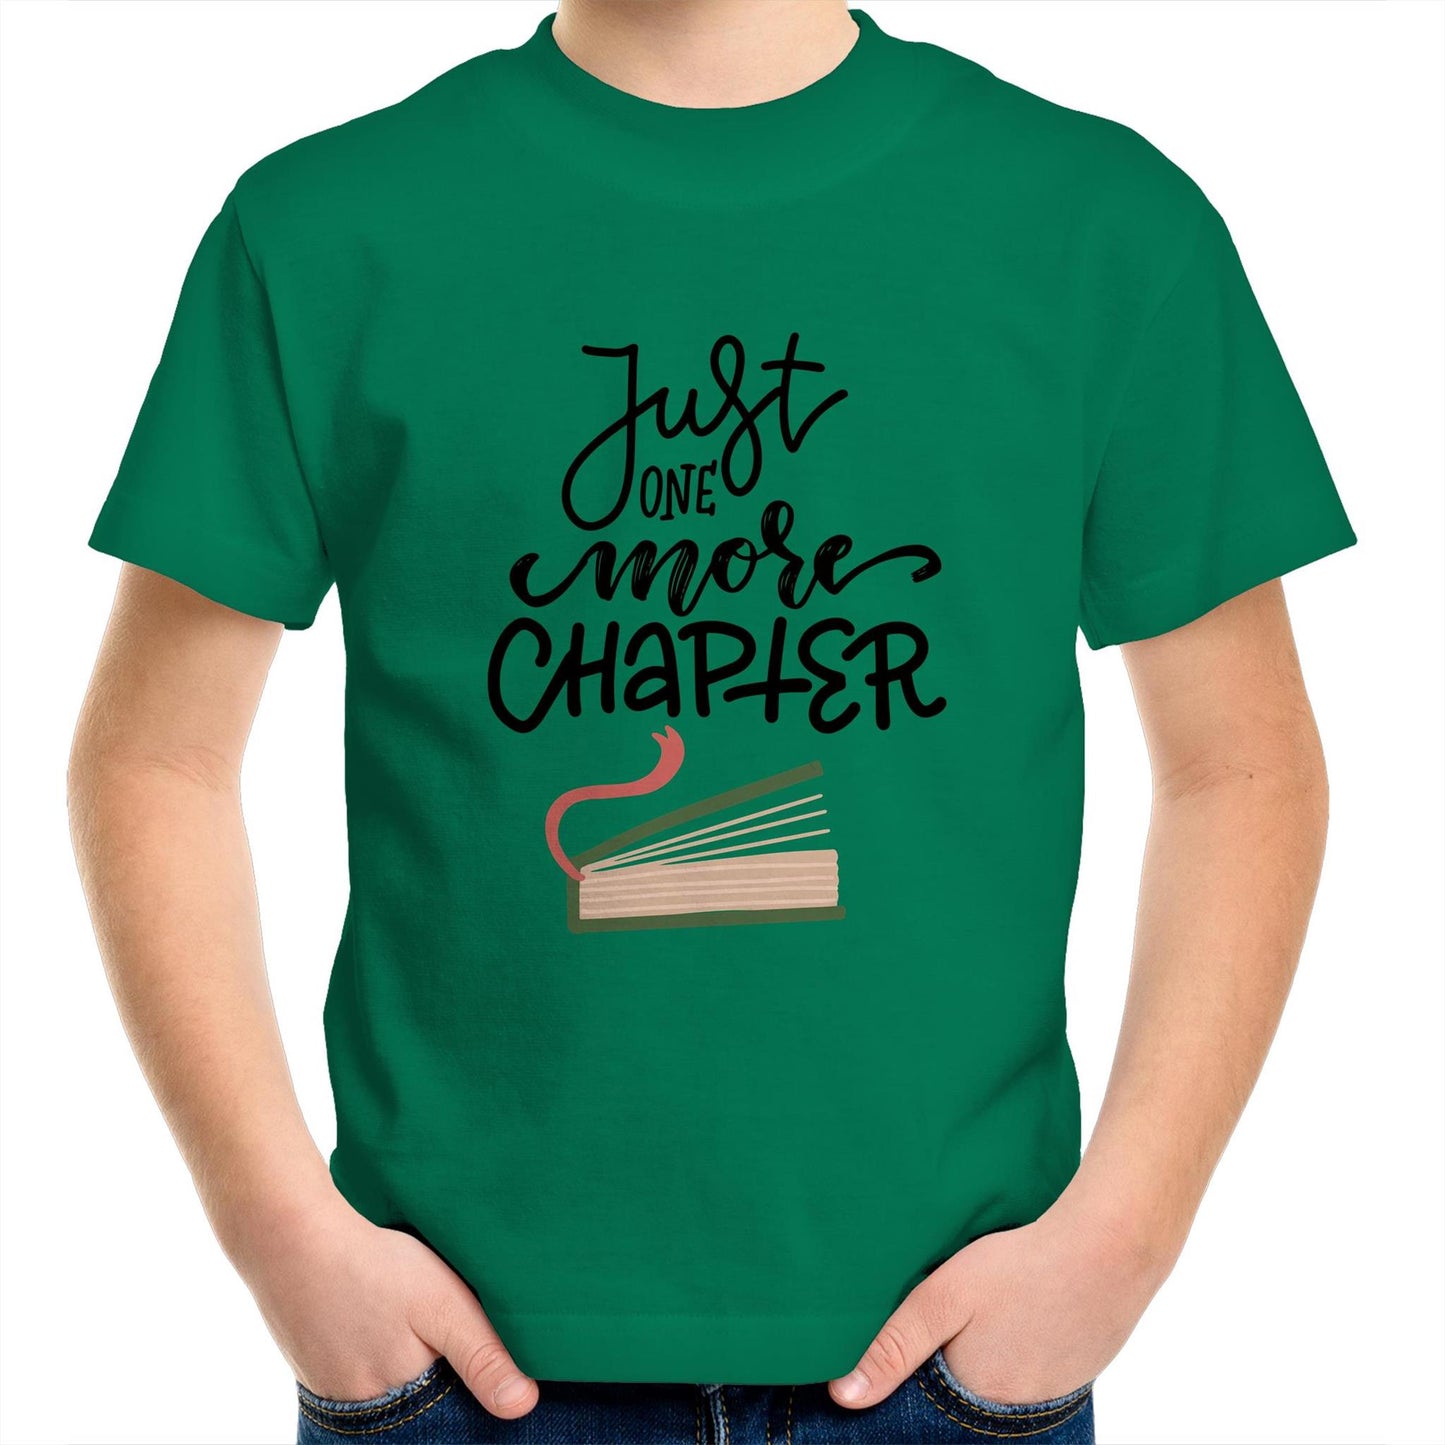 Just One More Chapter - Kids Youth Crew T-Shirt Kelly Green Kids Youth T-shirt Reading